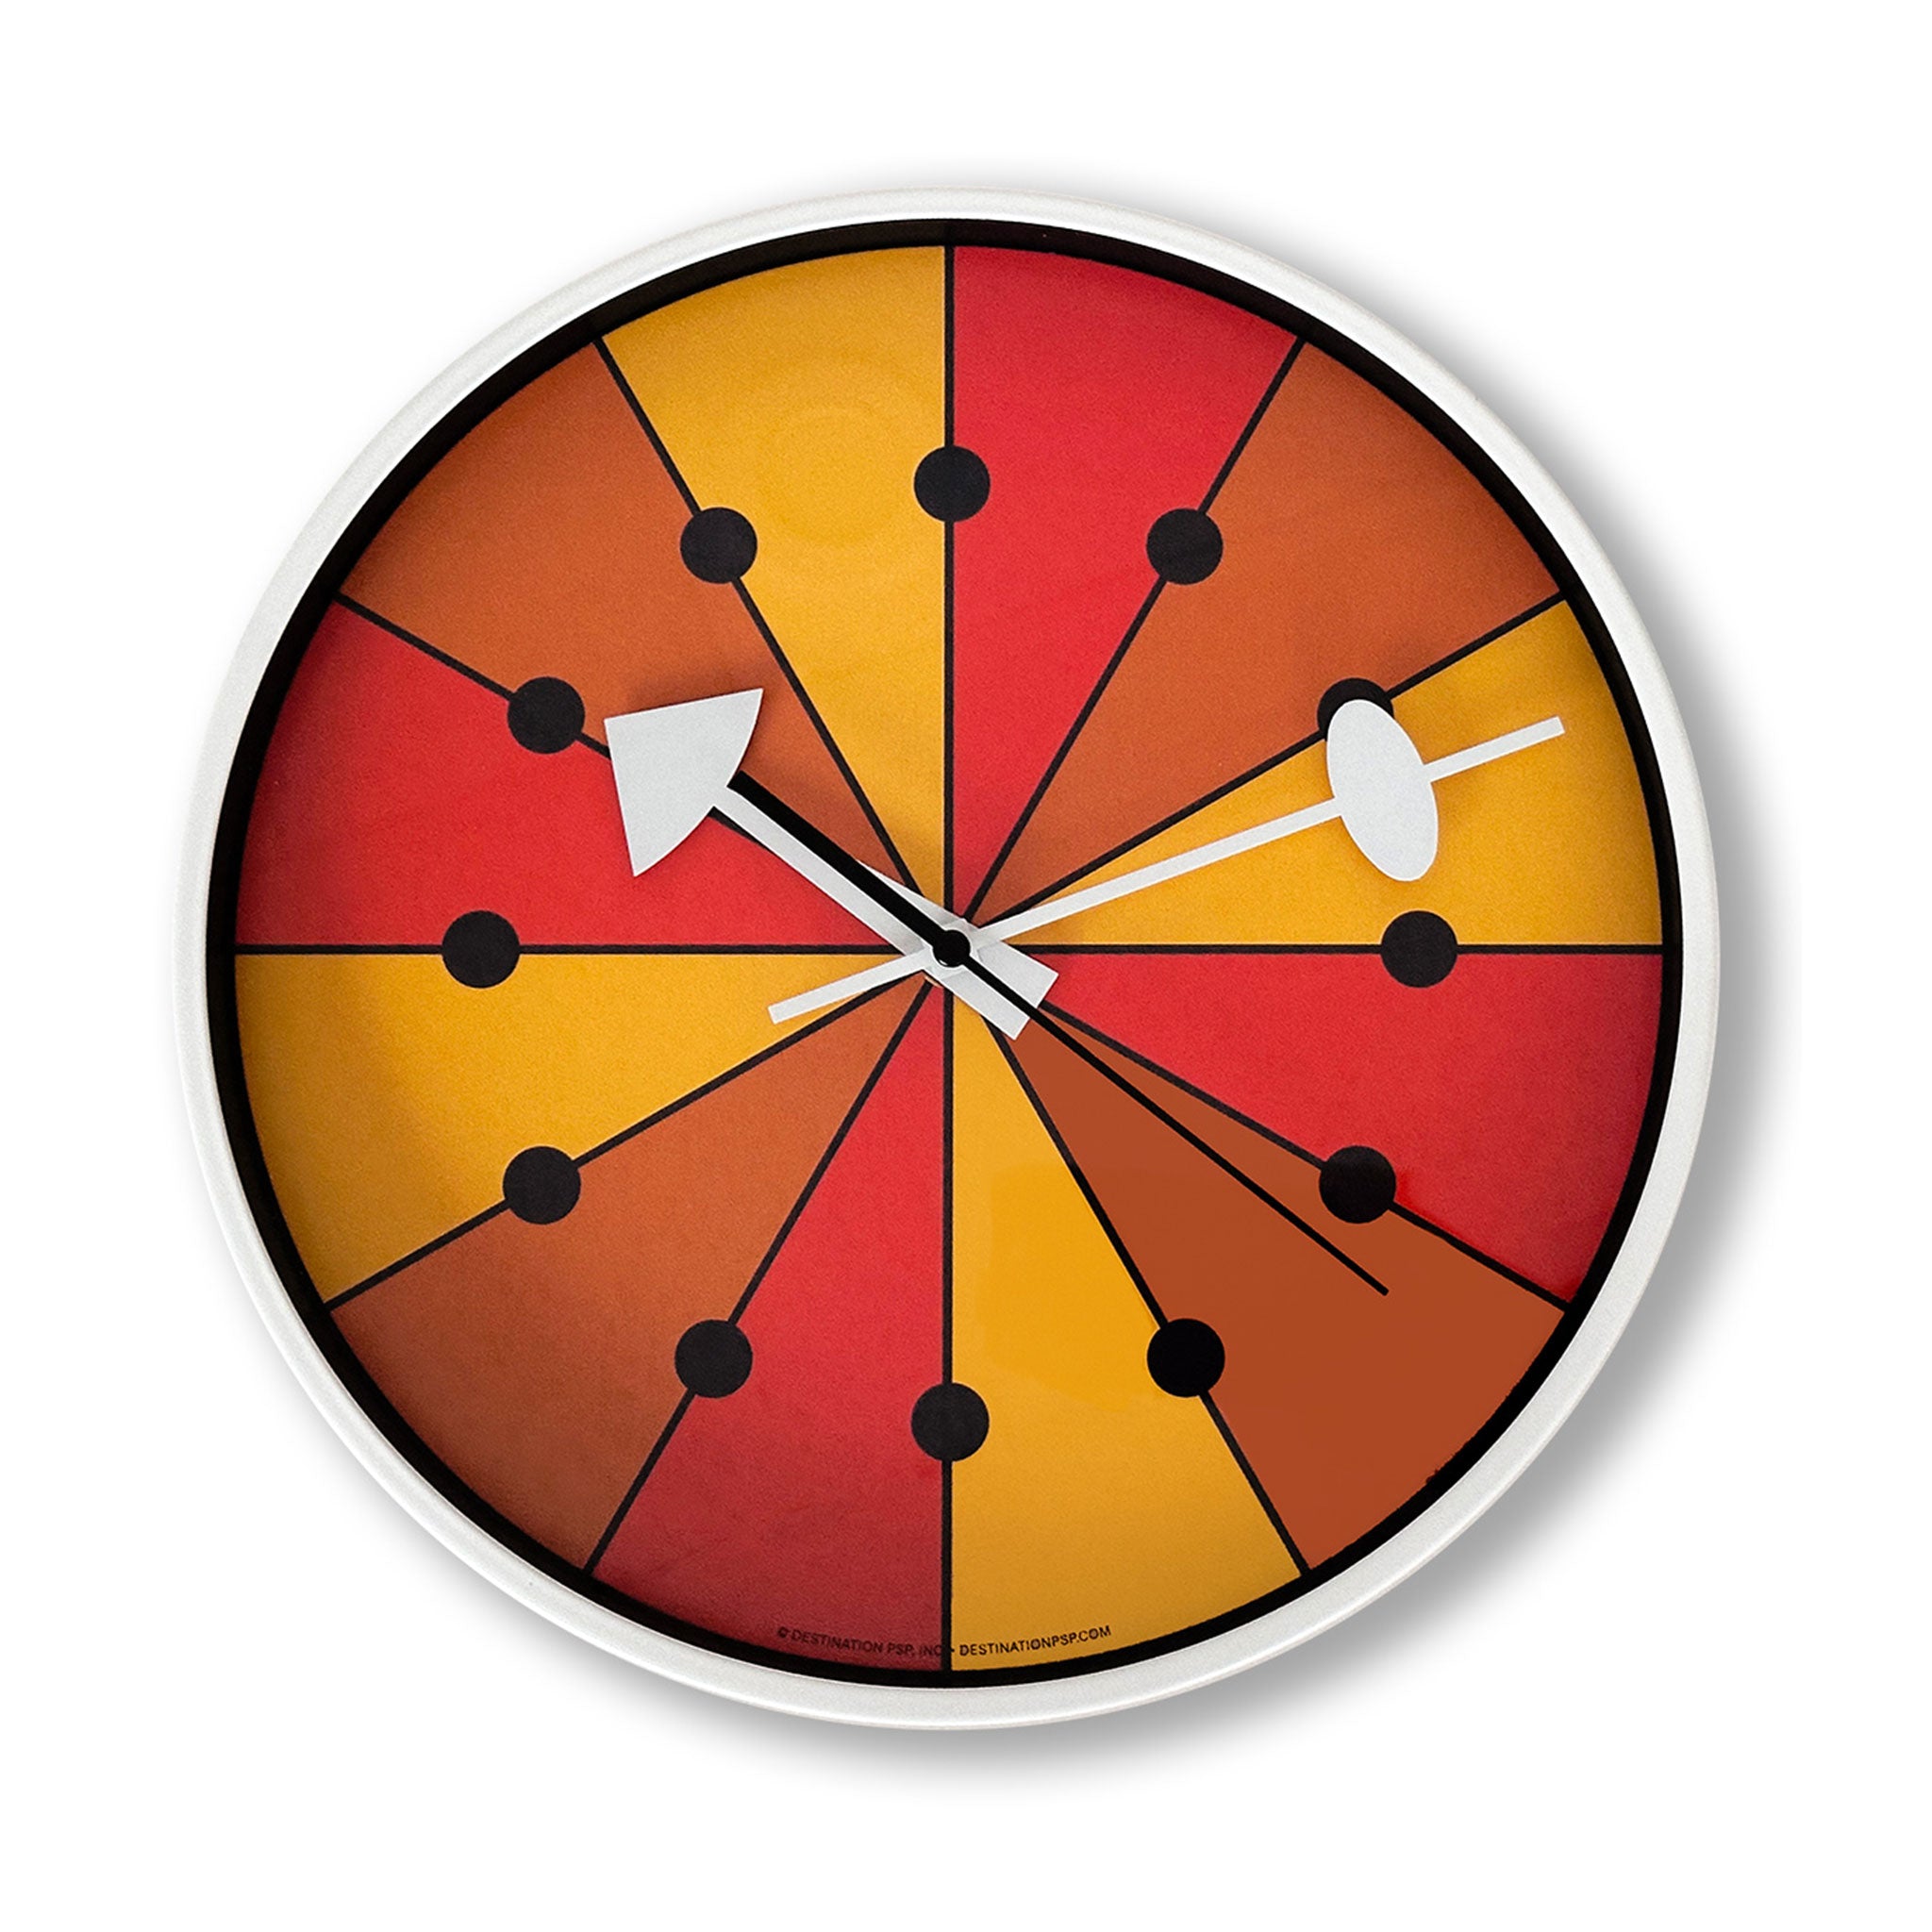 Mod orange yellow and red wall clock with white hands and rim